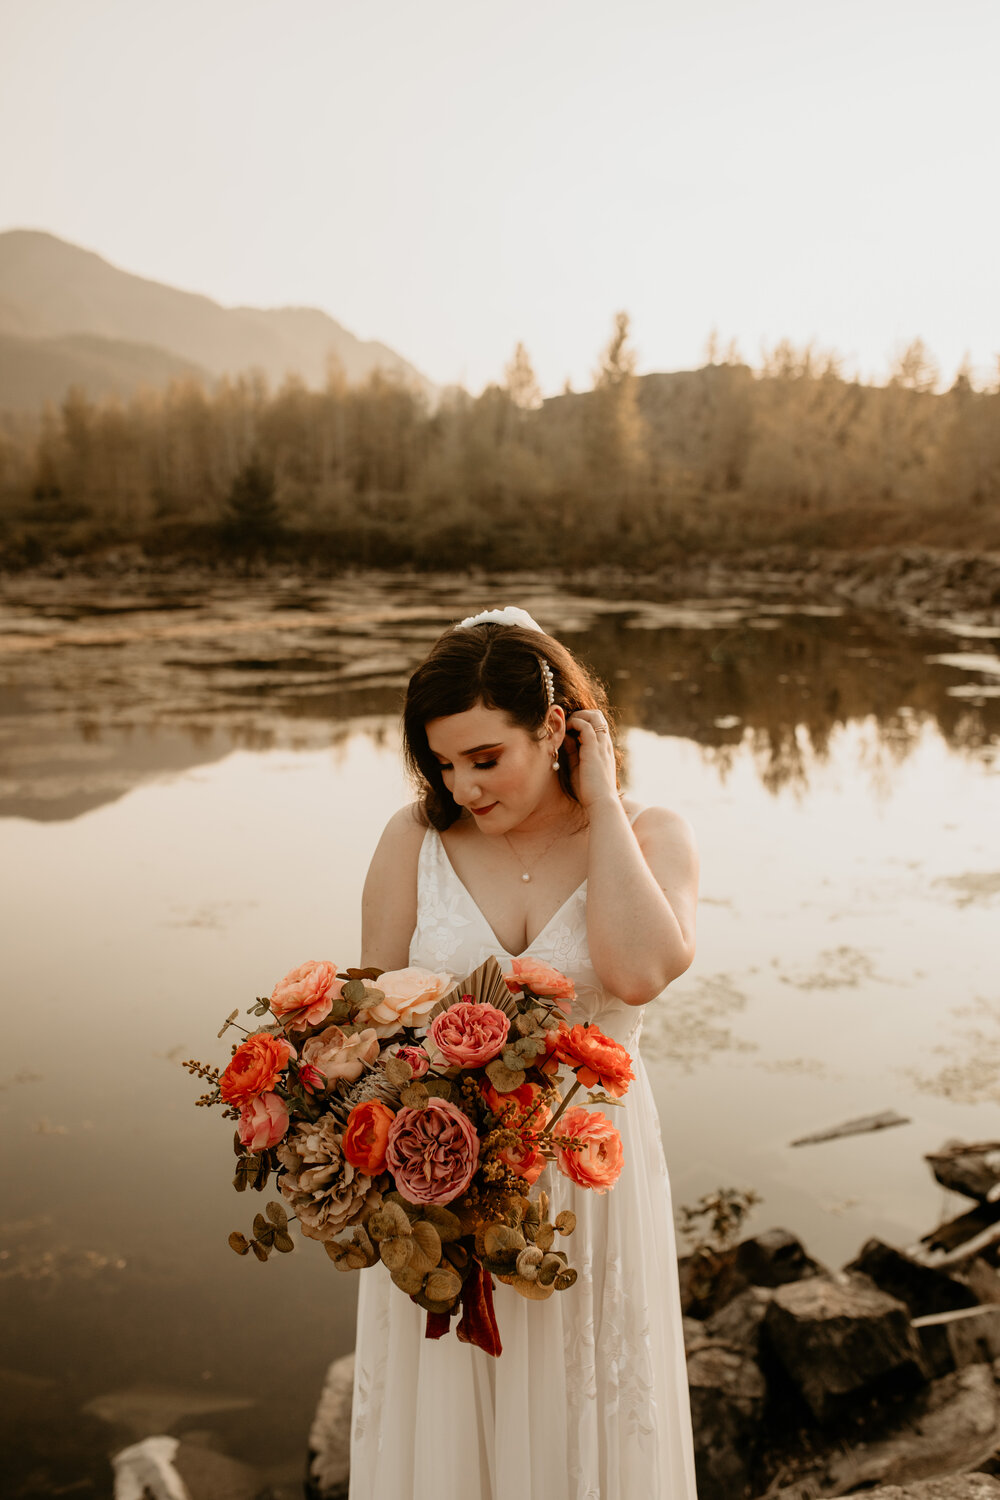 how to have a sustainable elopement! Here’s a guide to having an environmentally friendly elopement! adventure elopement ideas.